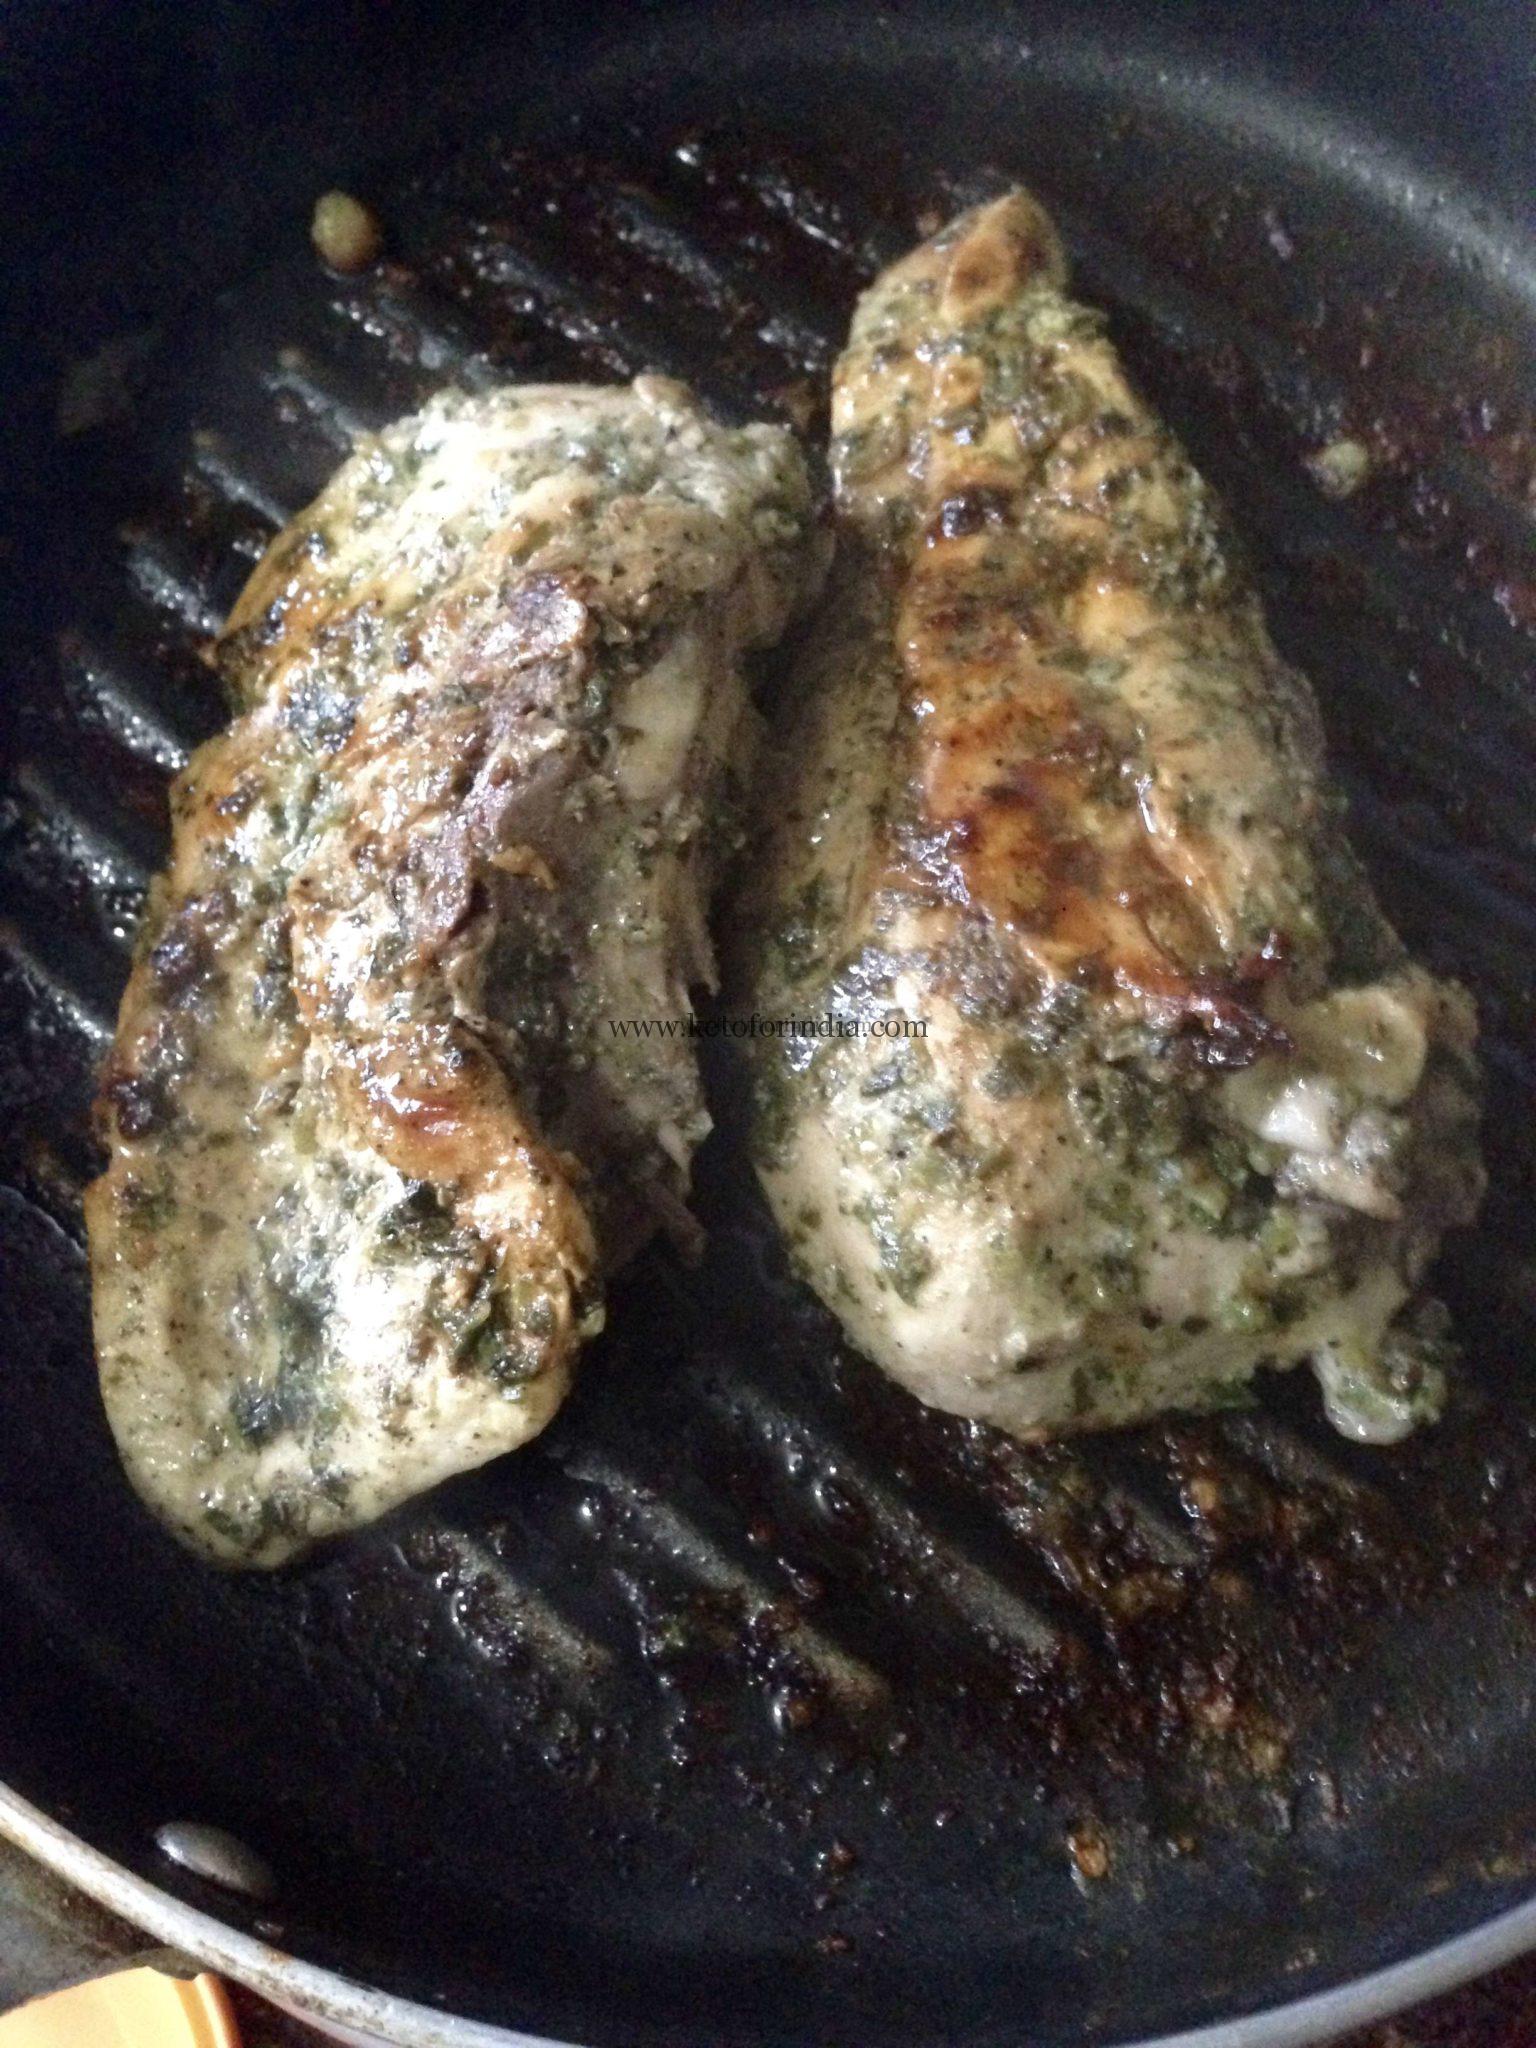 Recipe of Keto Haryali Chicken or Indian Grillied Chicken